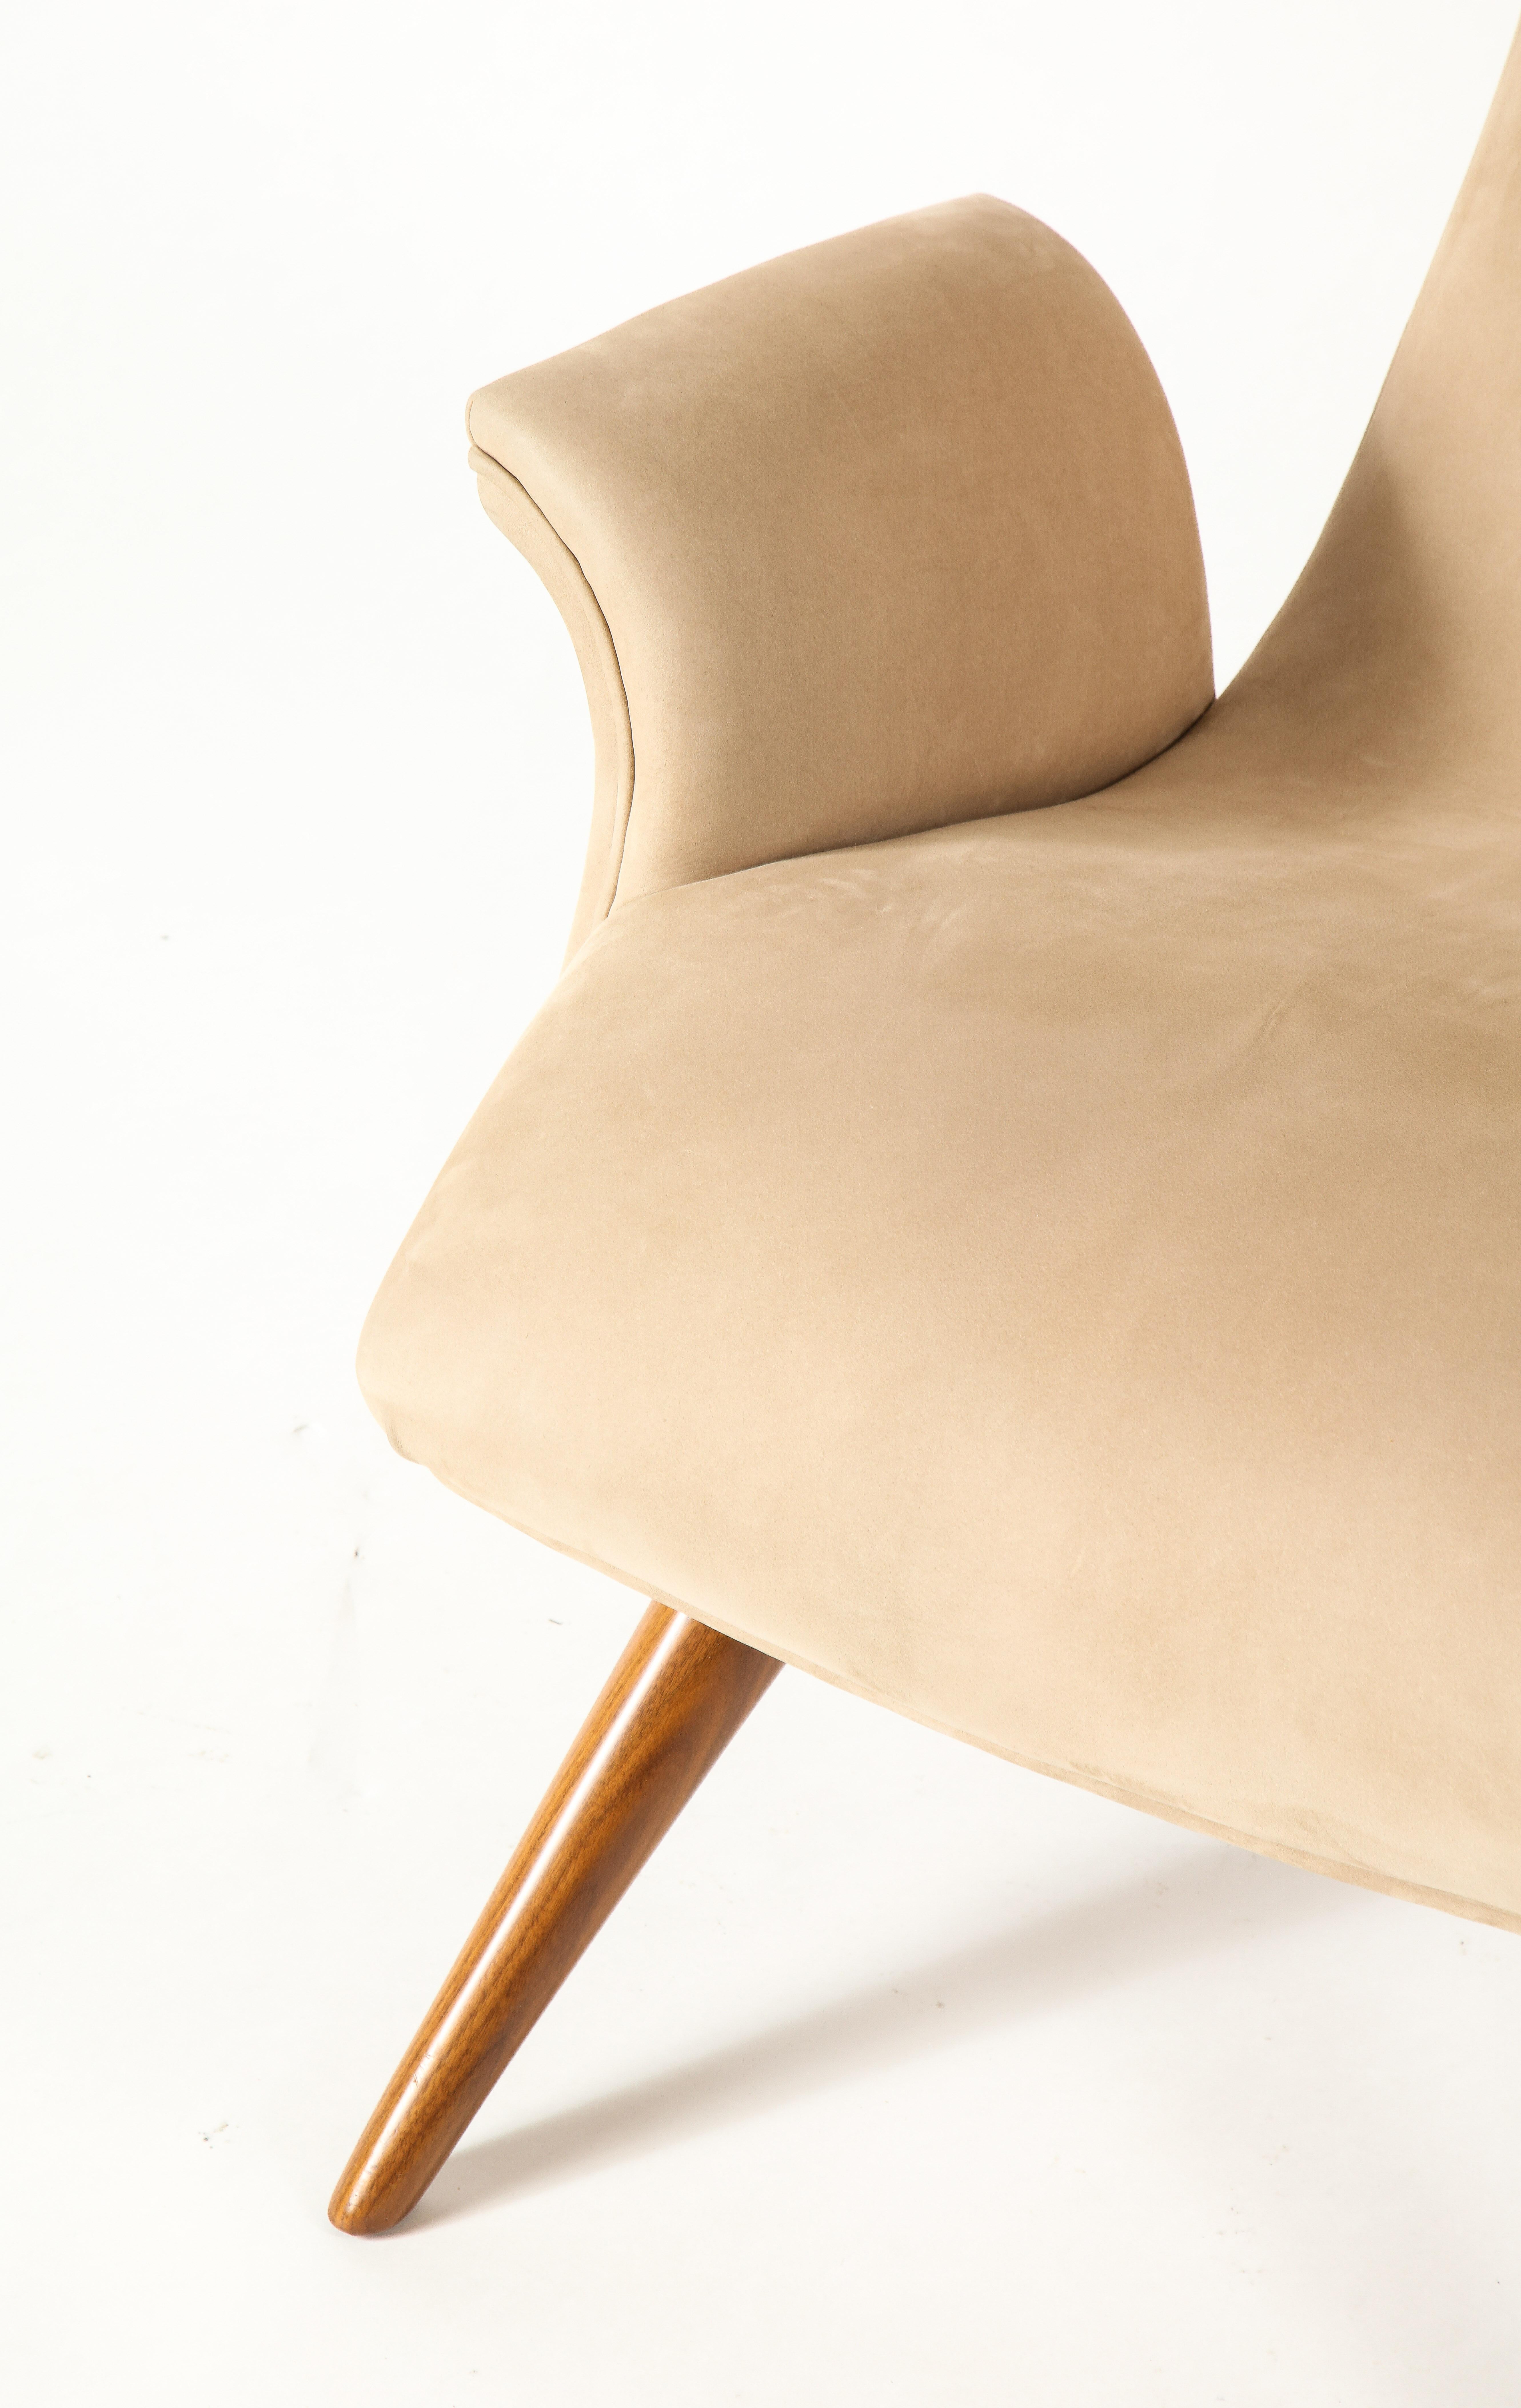 Vladimir Kagan Ondine Chair with Sueded Leather Upholstery & Natural Walnut Base 13